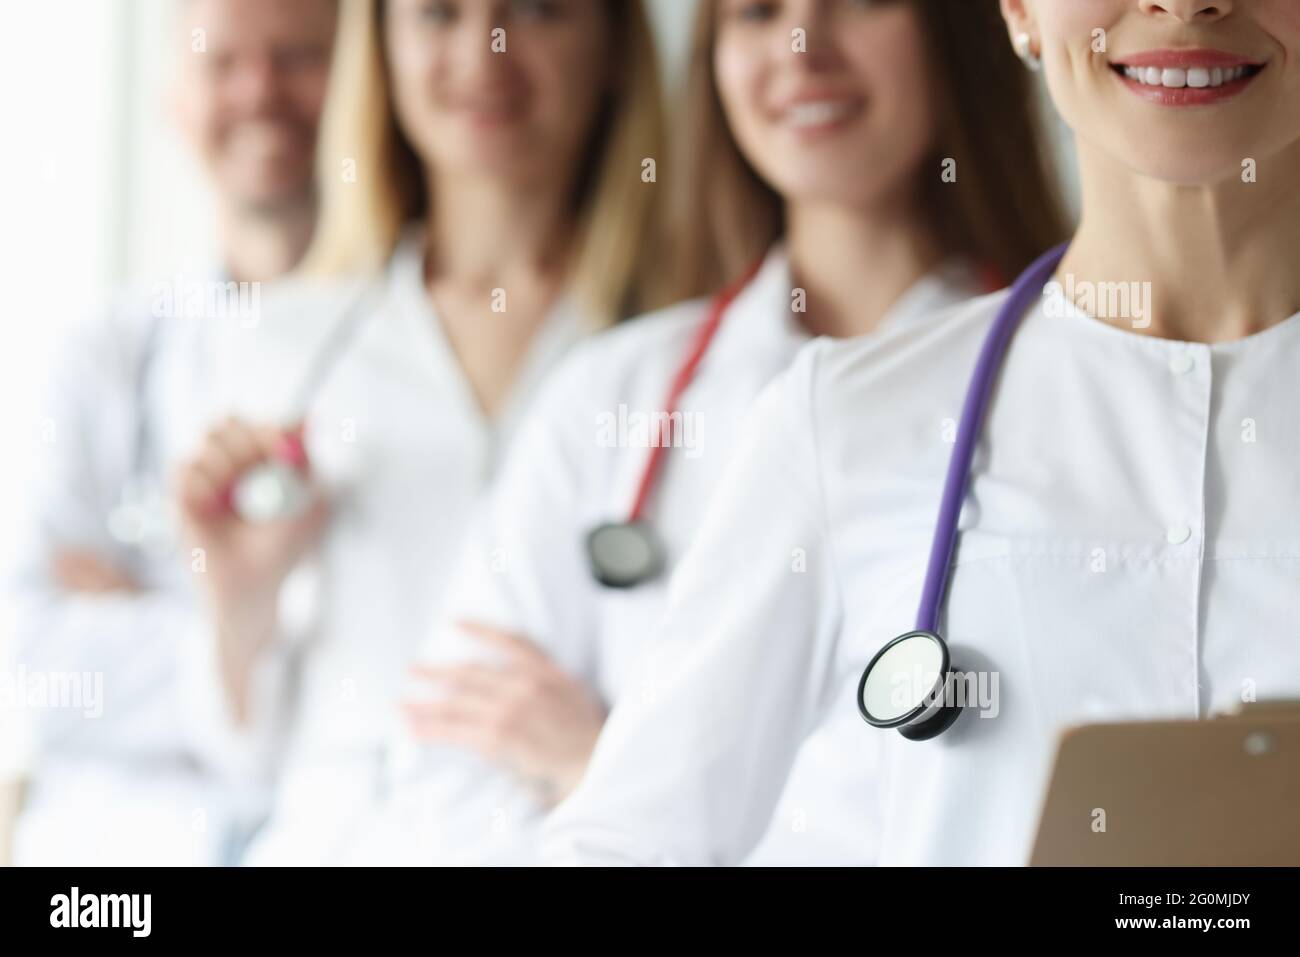 Team of doctor in white coats and stethoscopes stand together Stock Photo